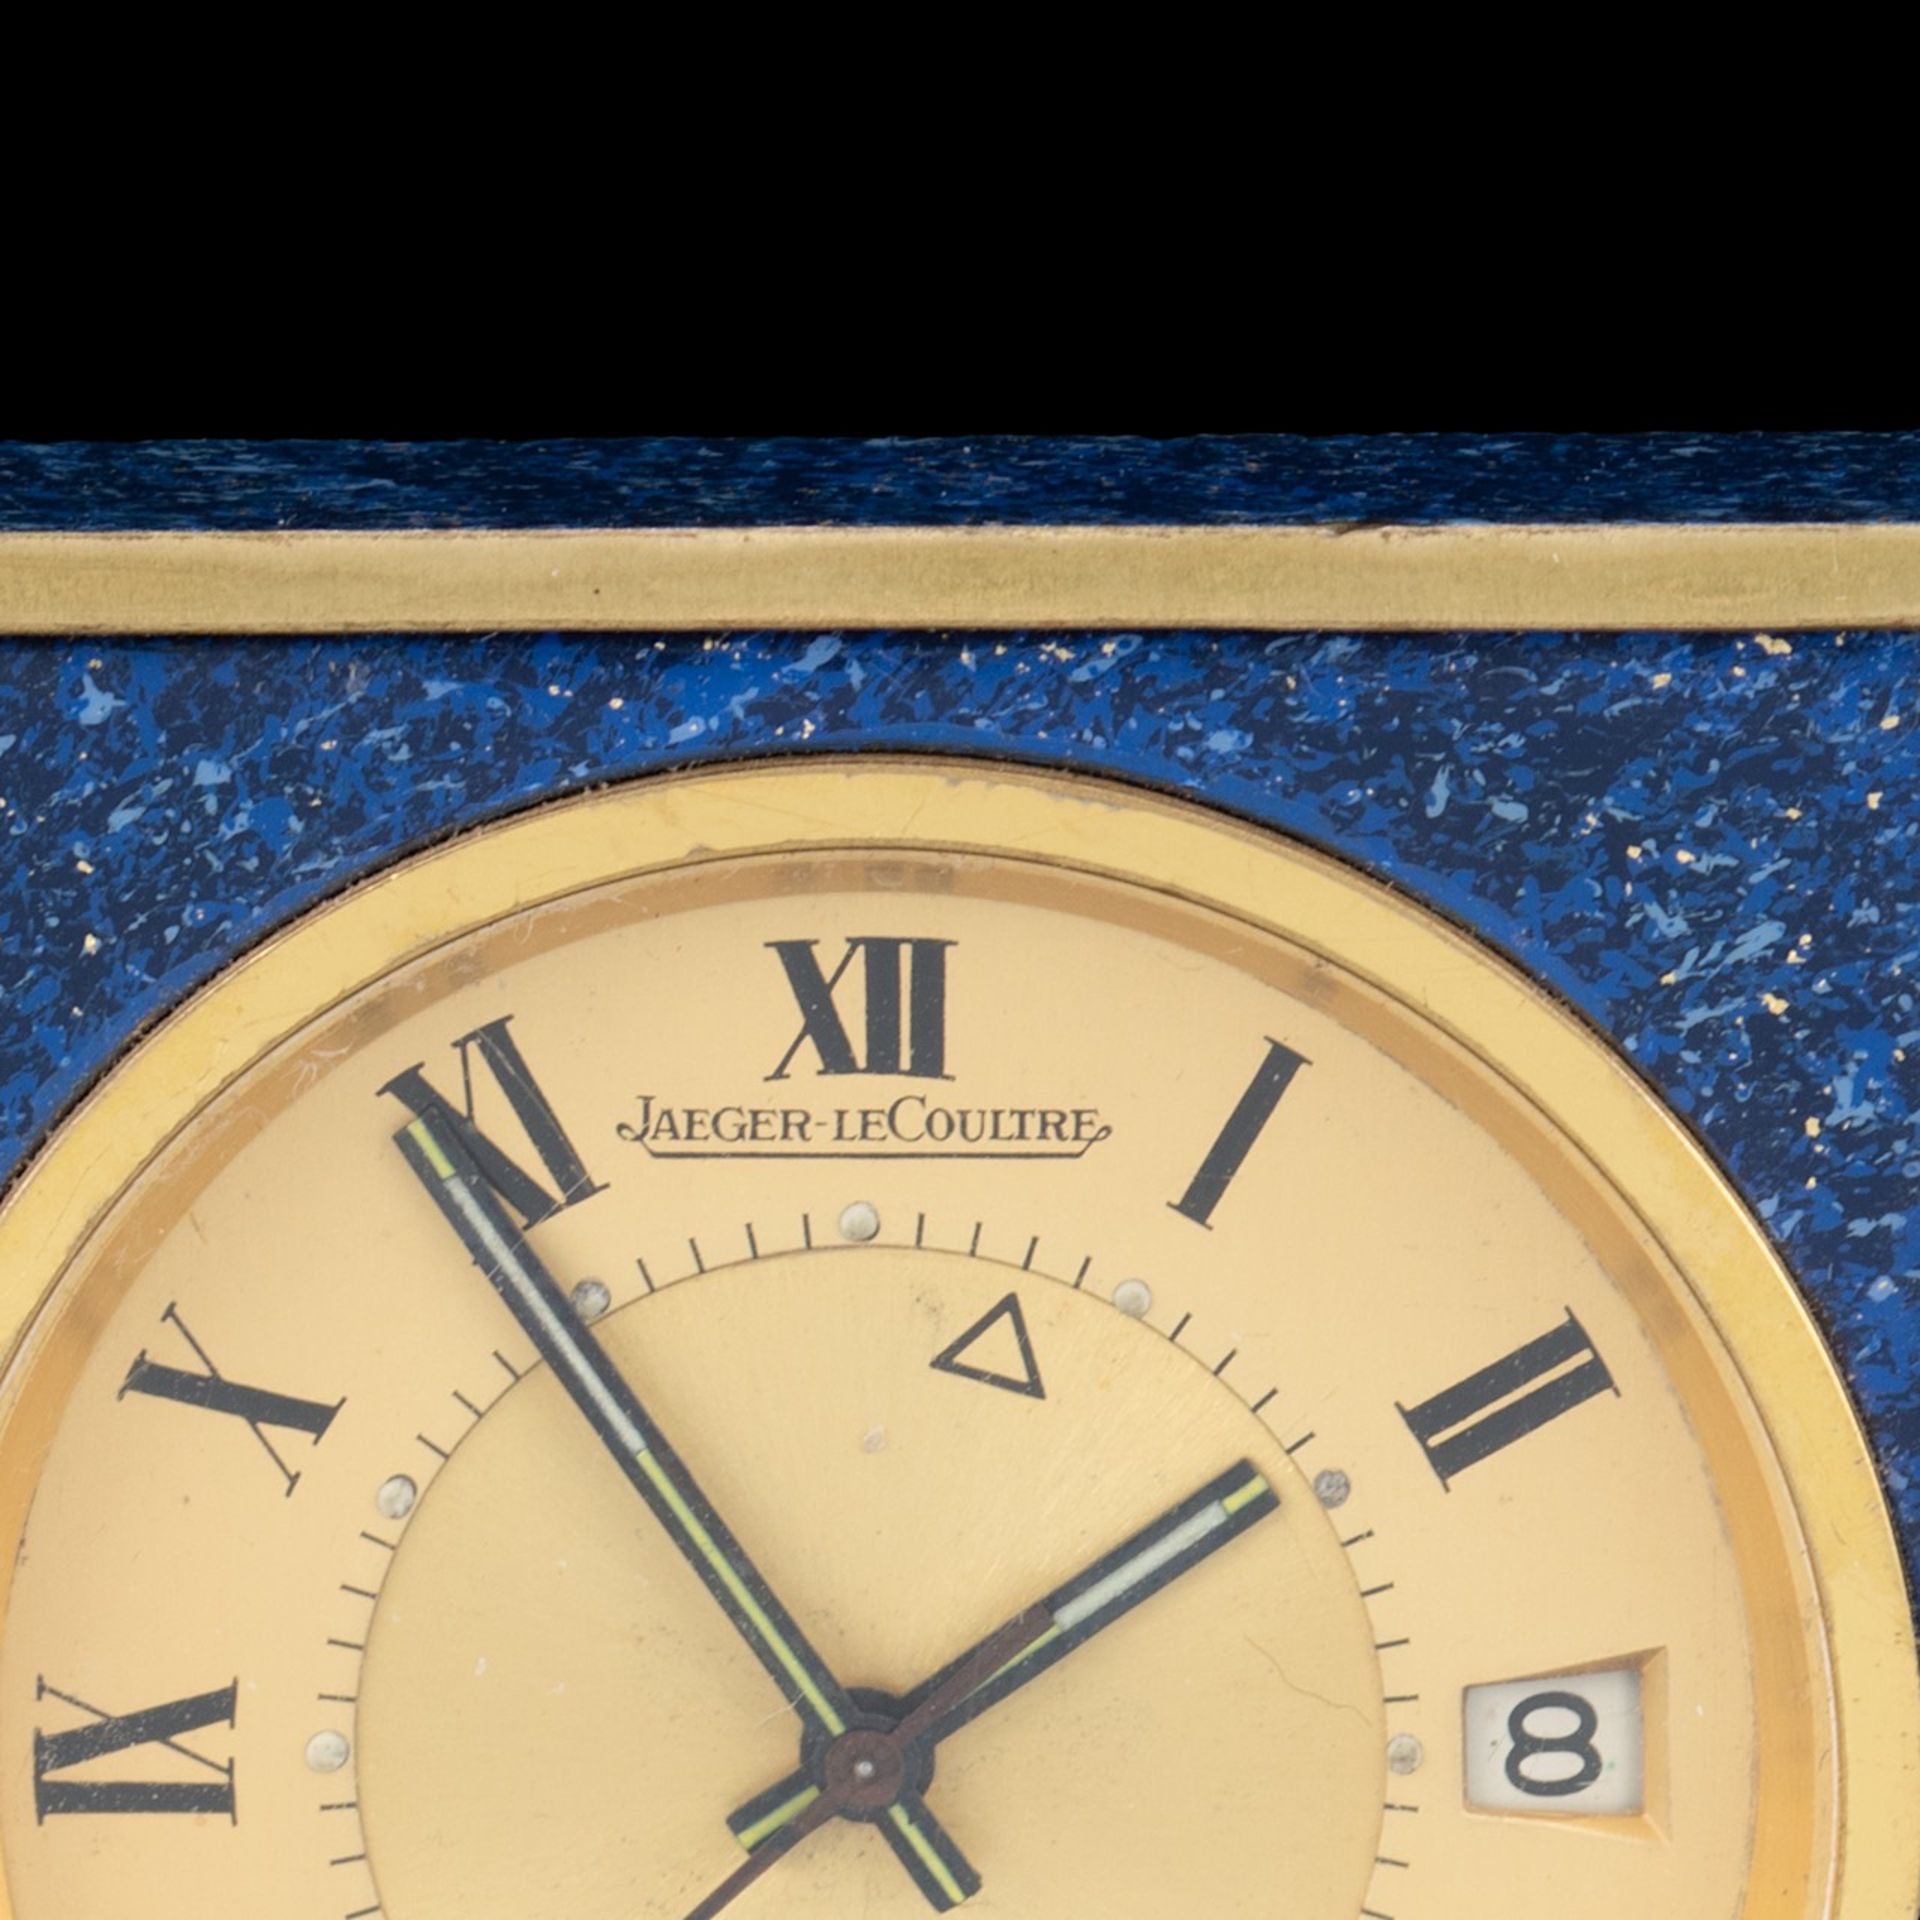 A Jaeger-LeCoultre folding travel alarm clock, W 4,3 - H 5,2 - total thickness 1,3 cm - Image 5 of 6